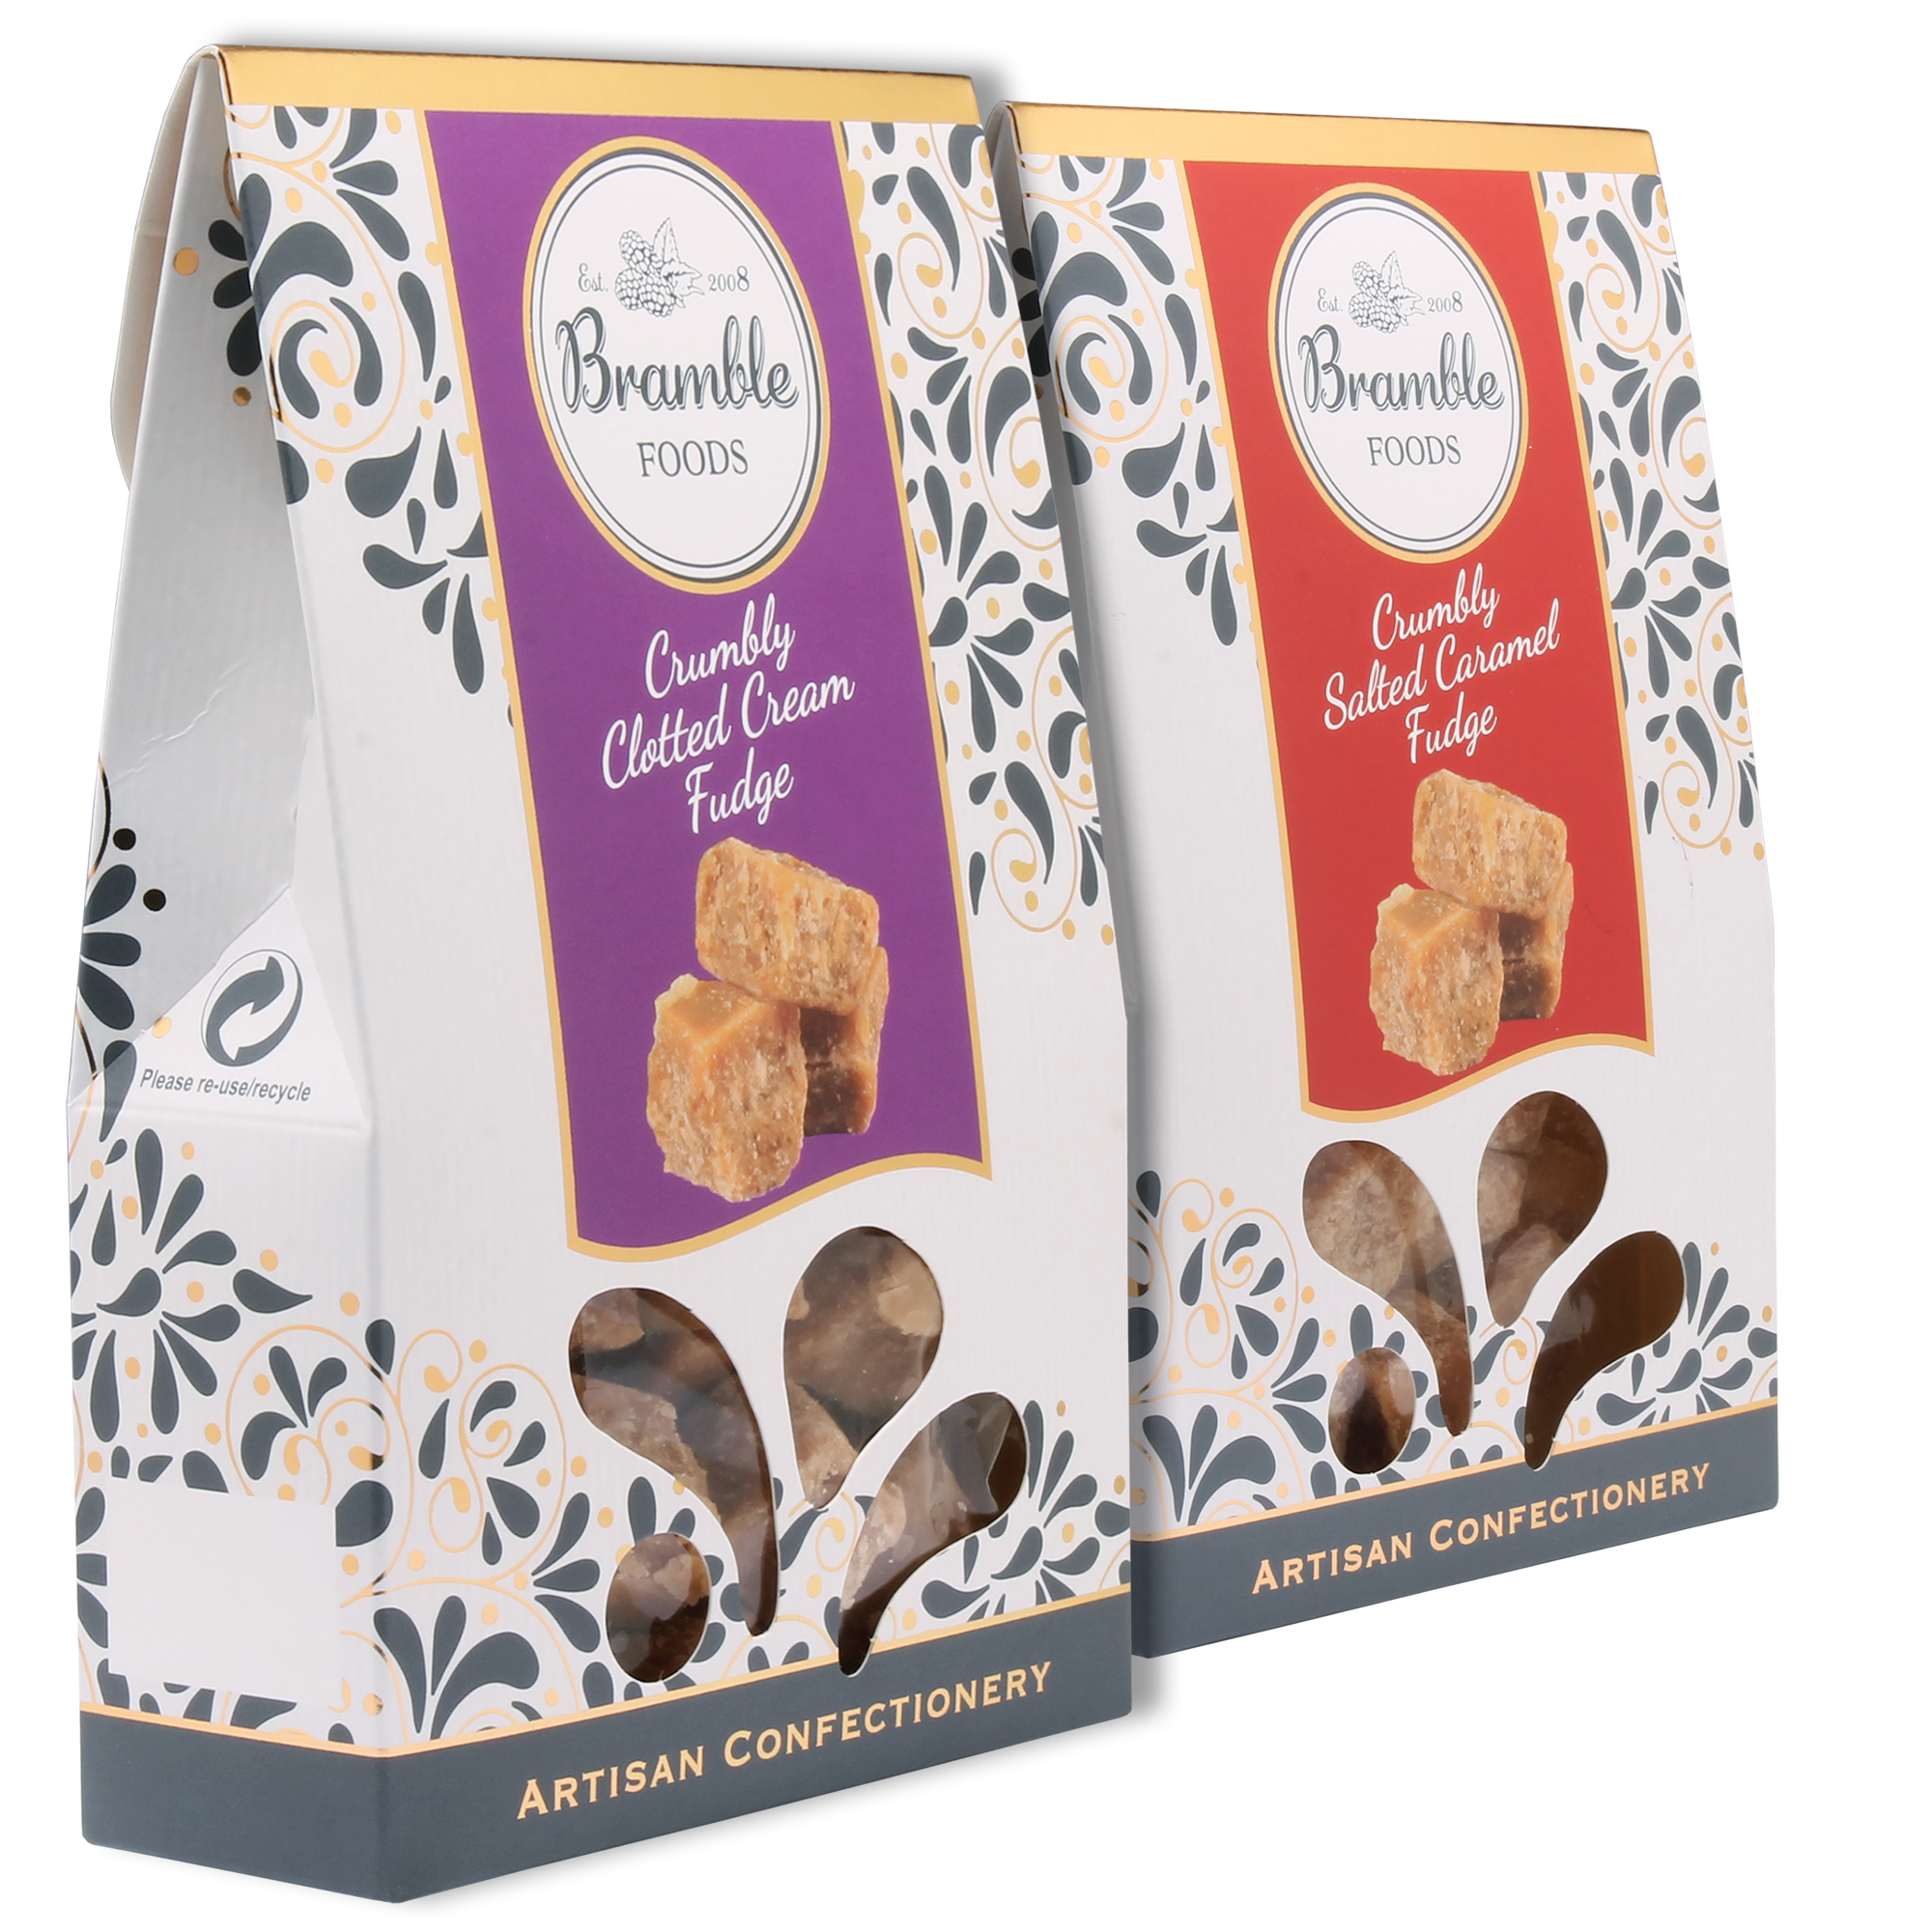 Twin Pack of Bramble Gourmet Crumbly Clotted and Salted Caramel Fudge